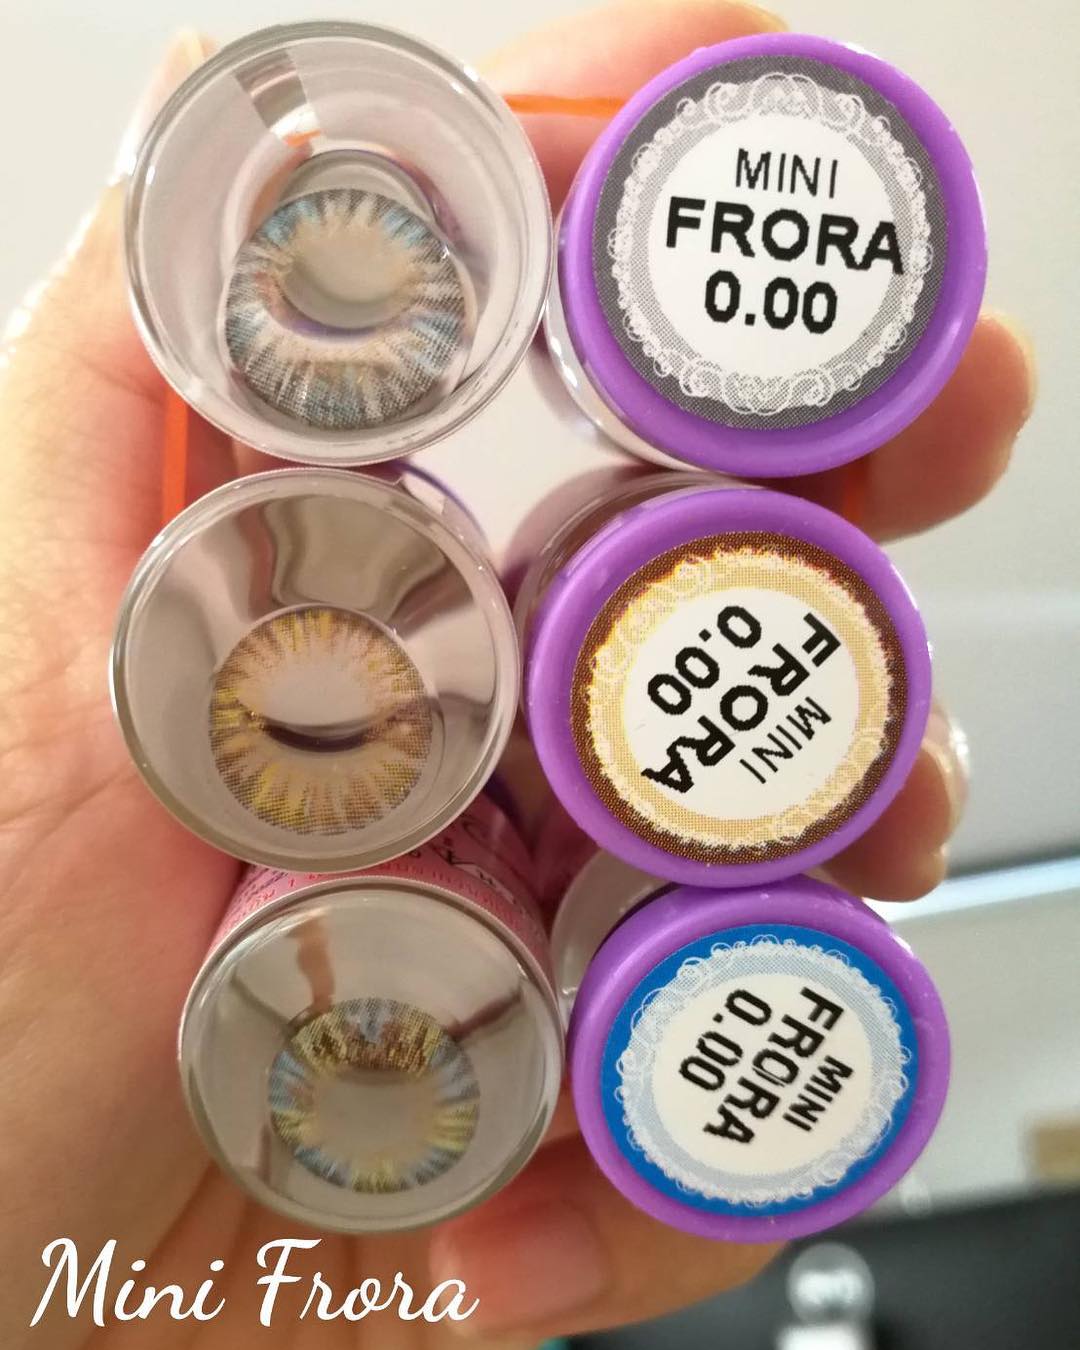 softlens dreamcolor mini frora